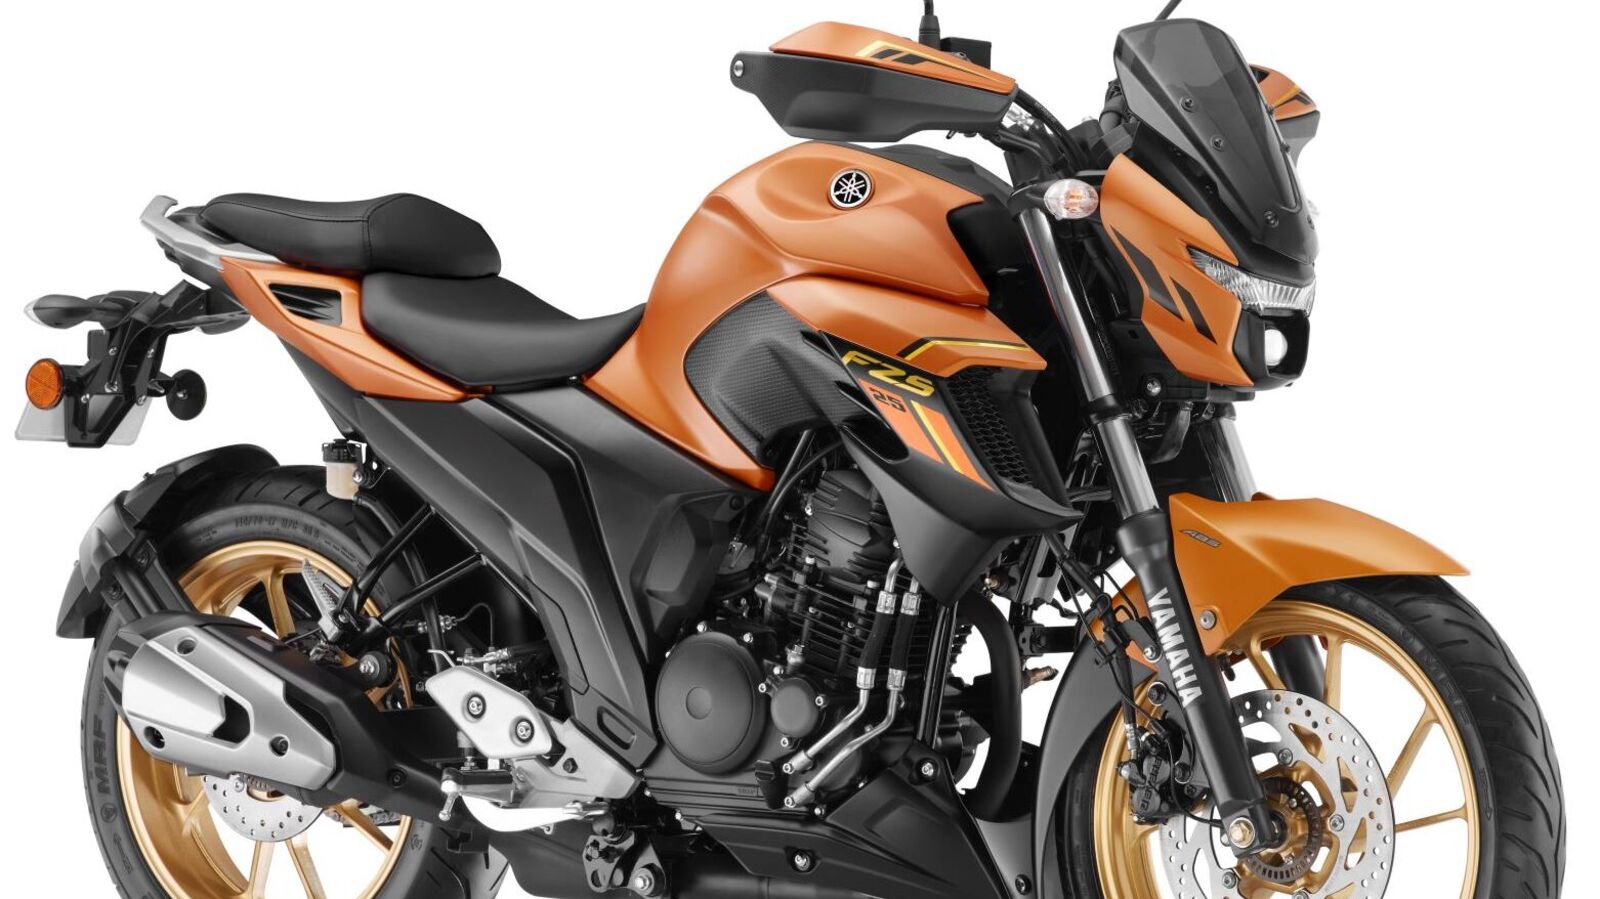 Yamaha Fz Series Becomes Dearer In India Ht Auto